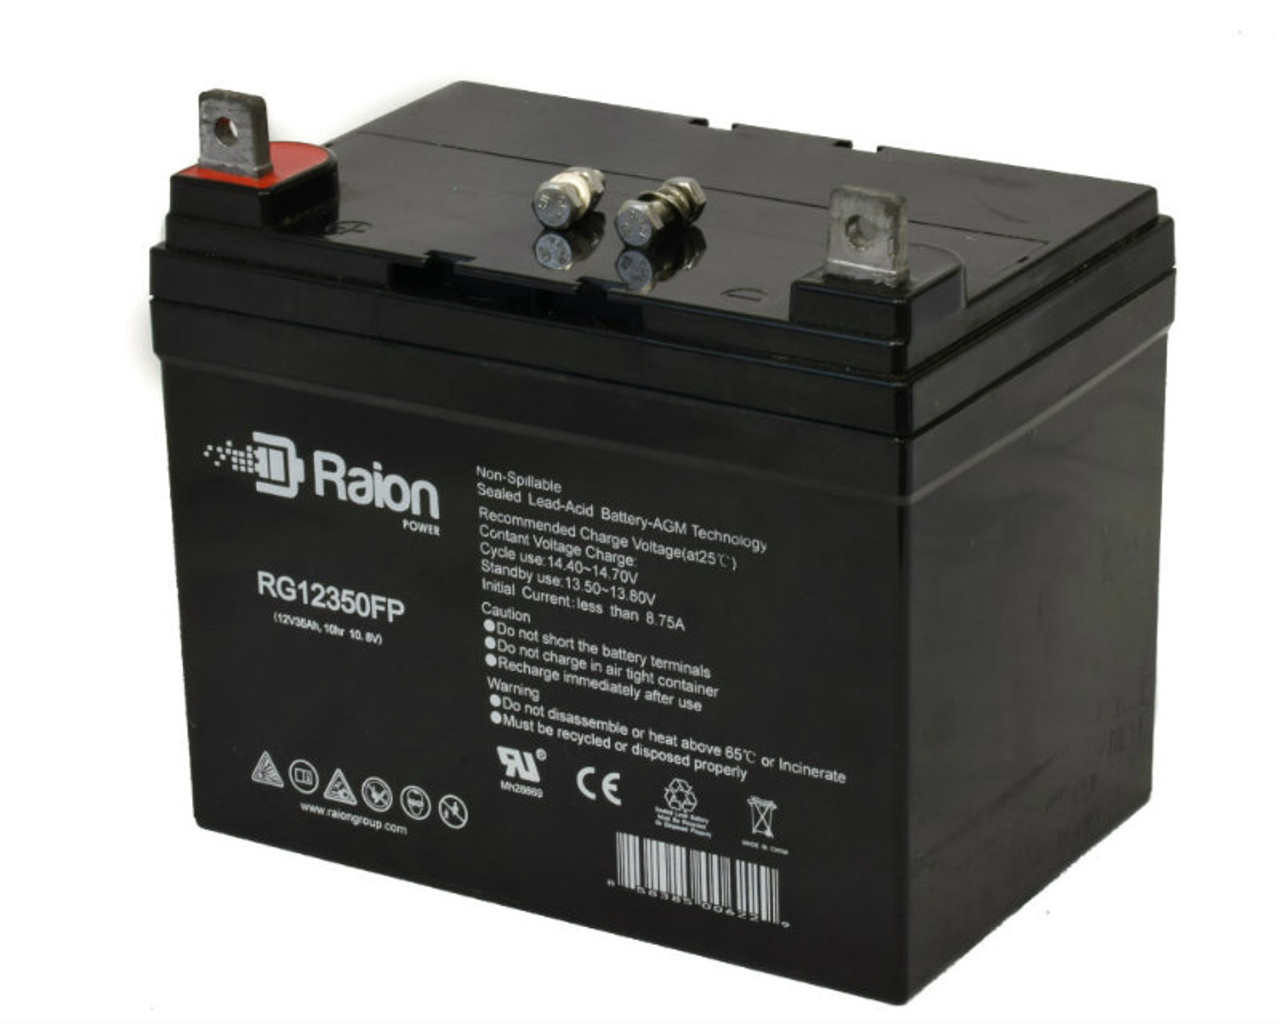 Raion Power Replacement 12V 35Ah Battery for Ford Motor Co. LGT125 - 1 Pack